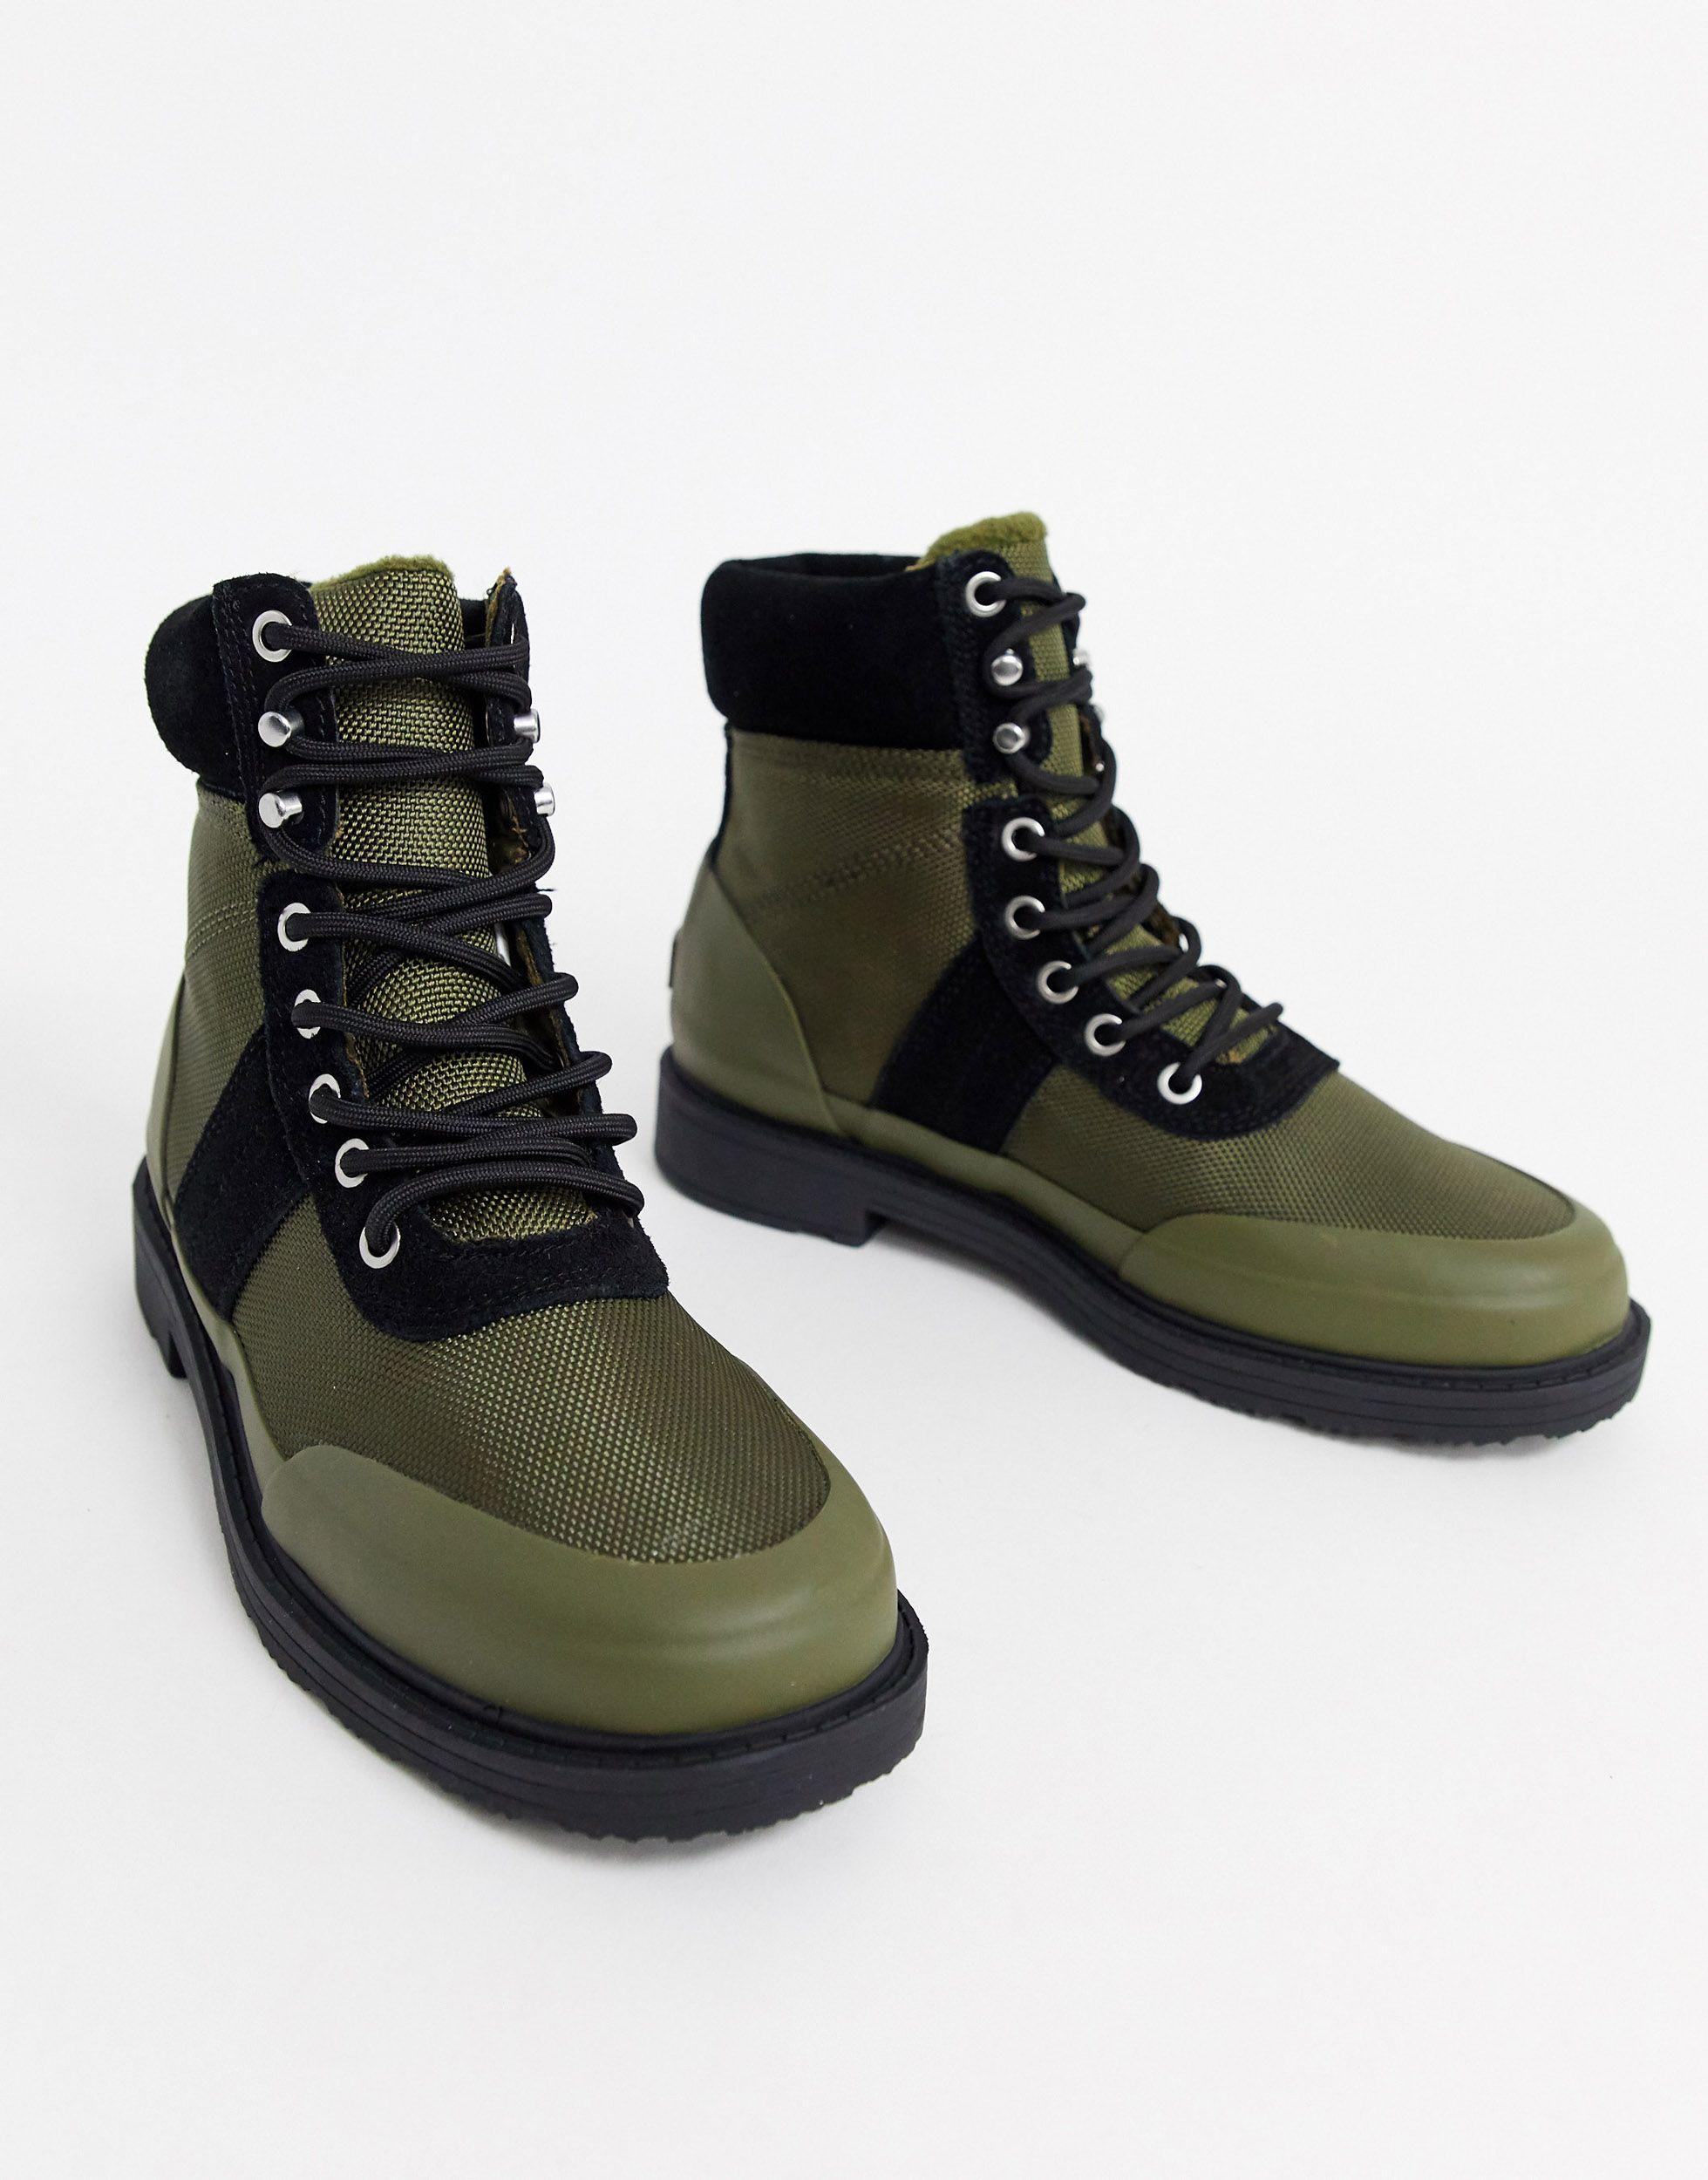 HUNTER Leather Insulated Hiker Boots in Olive (Green) - Lyst